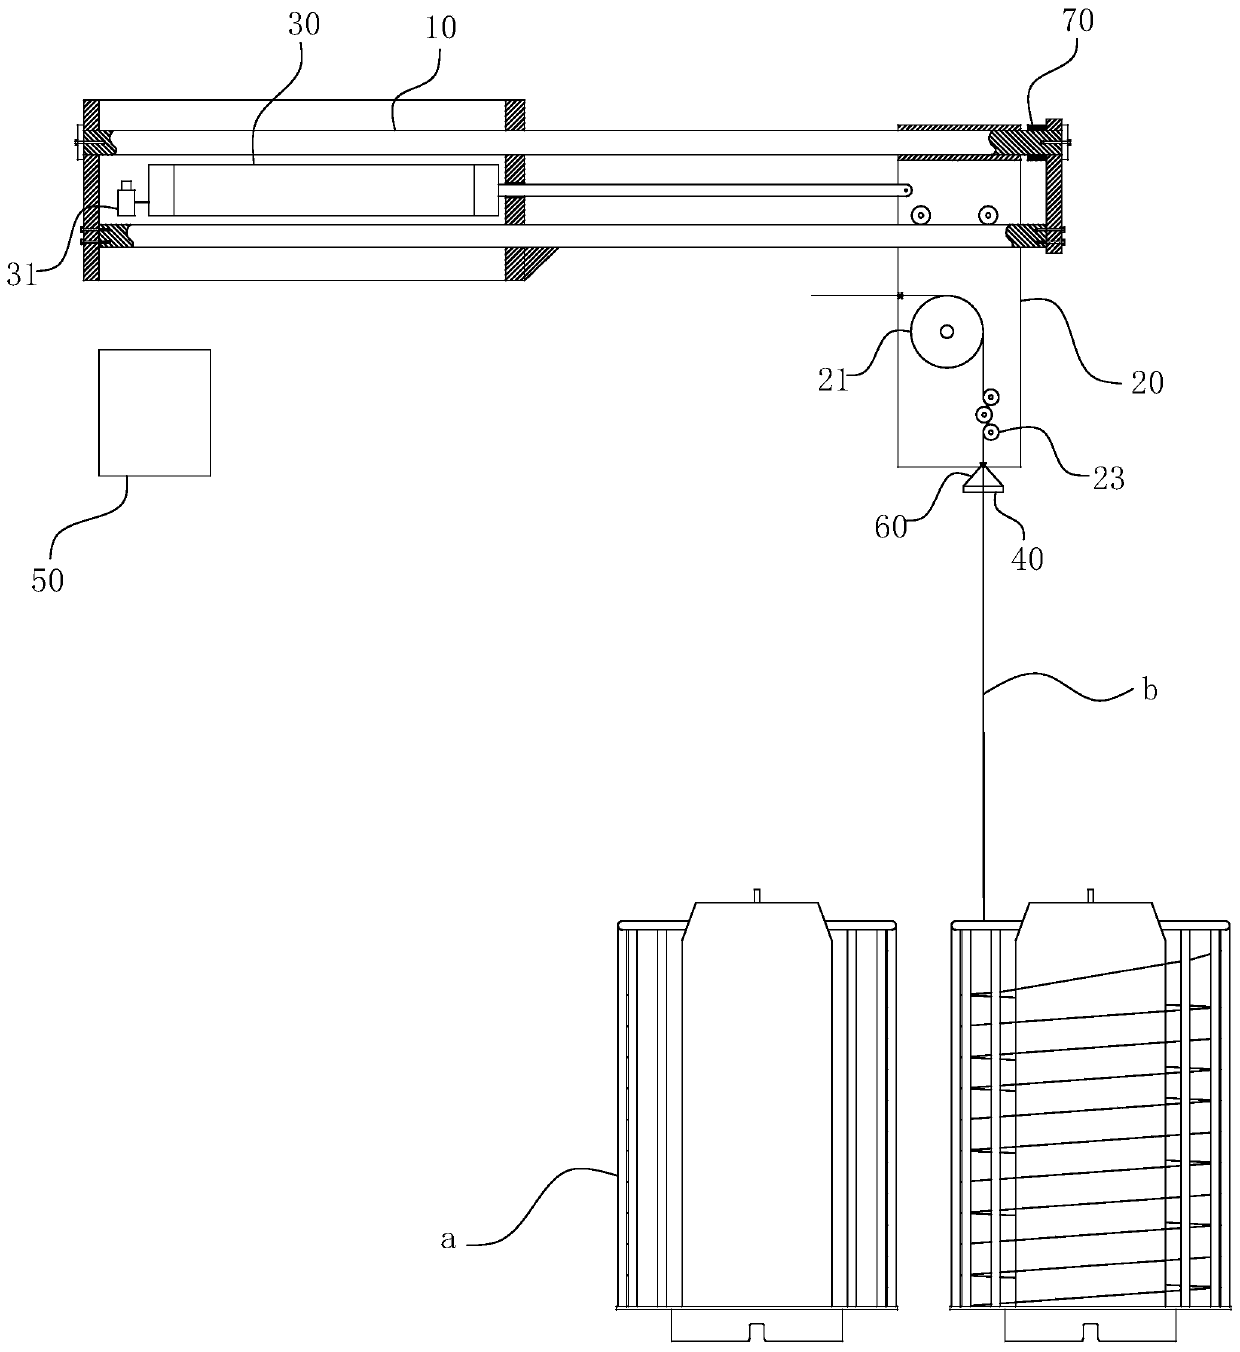 An inductive automatic wire changing system for multi-head wire drawing machine